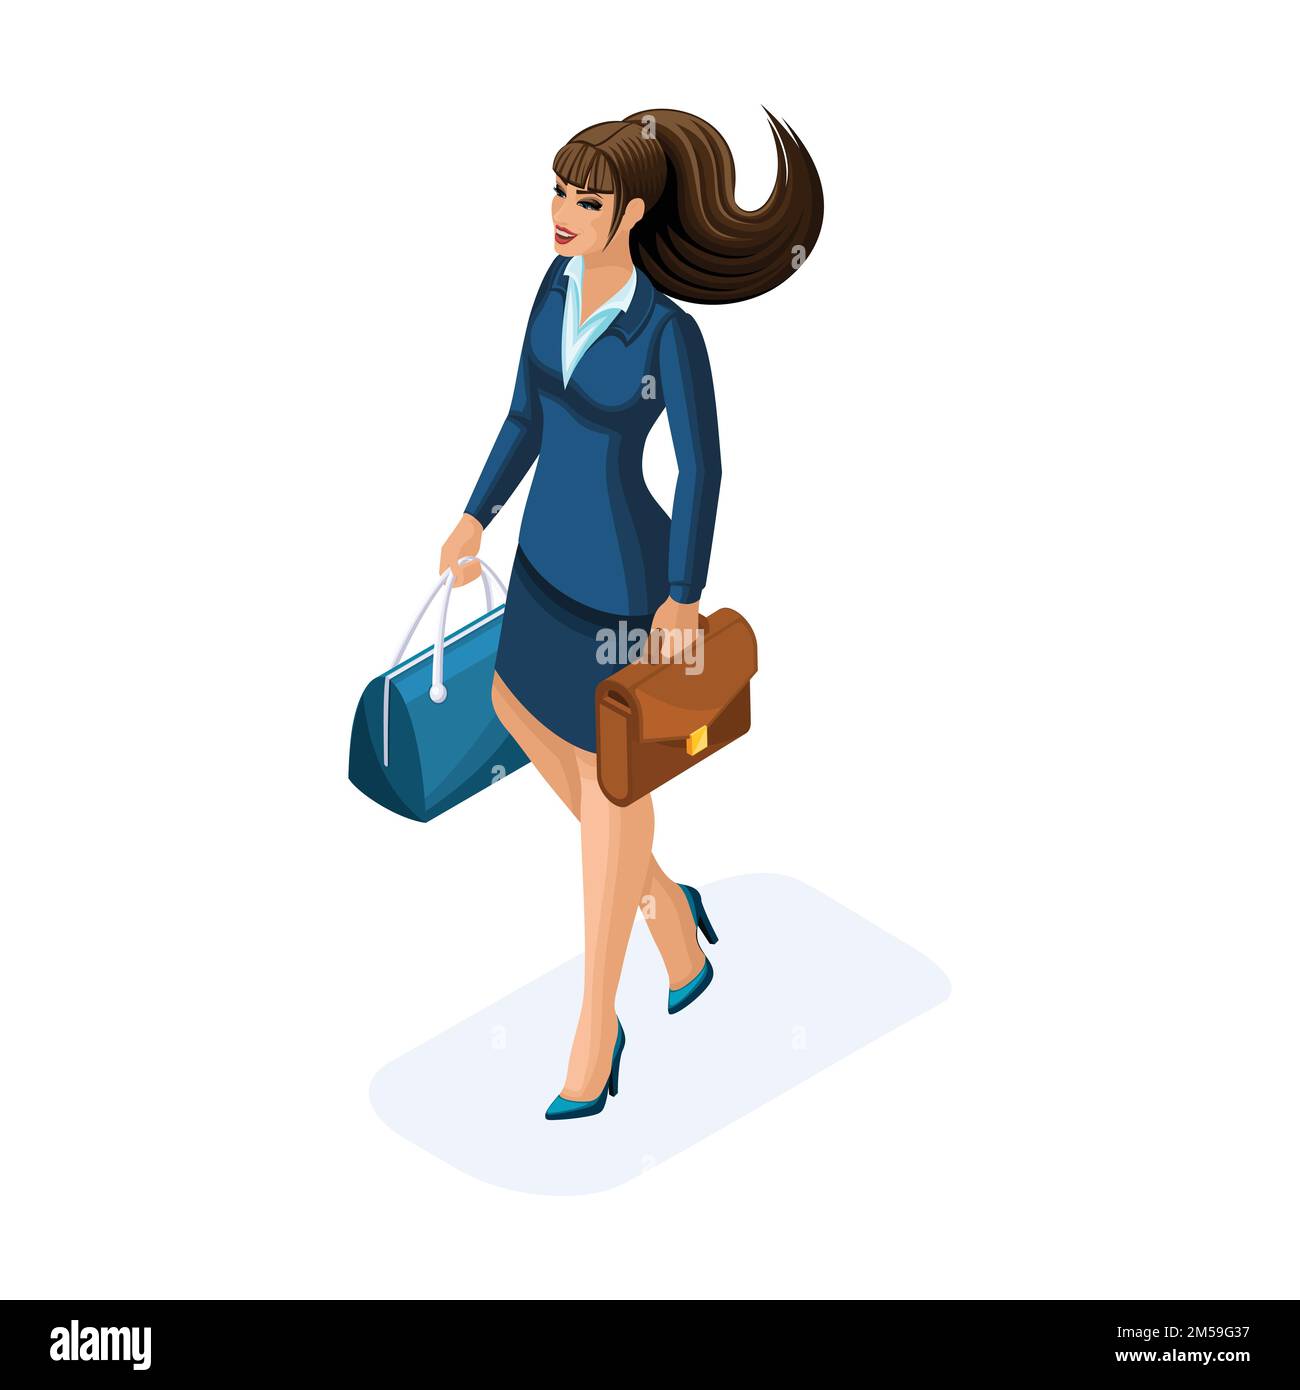 Isometric Of A Beautiful Woman On A Business Trip Comes With Her Luggage Elegant Business Suit